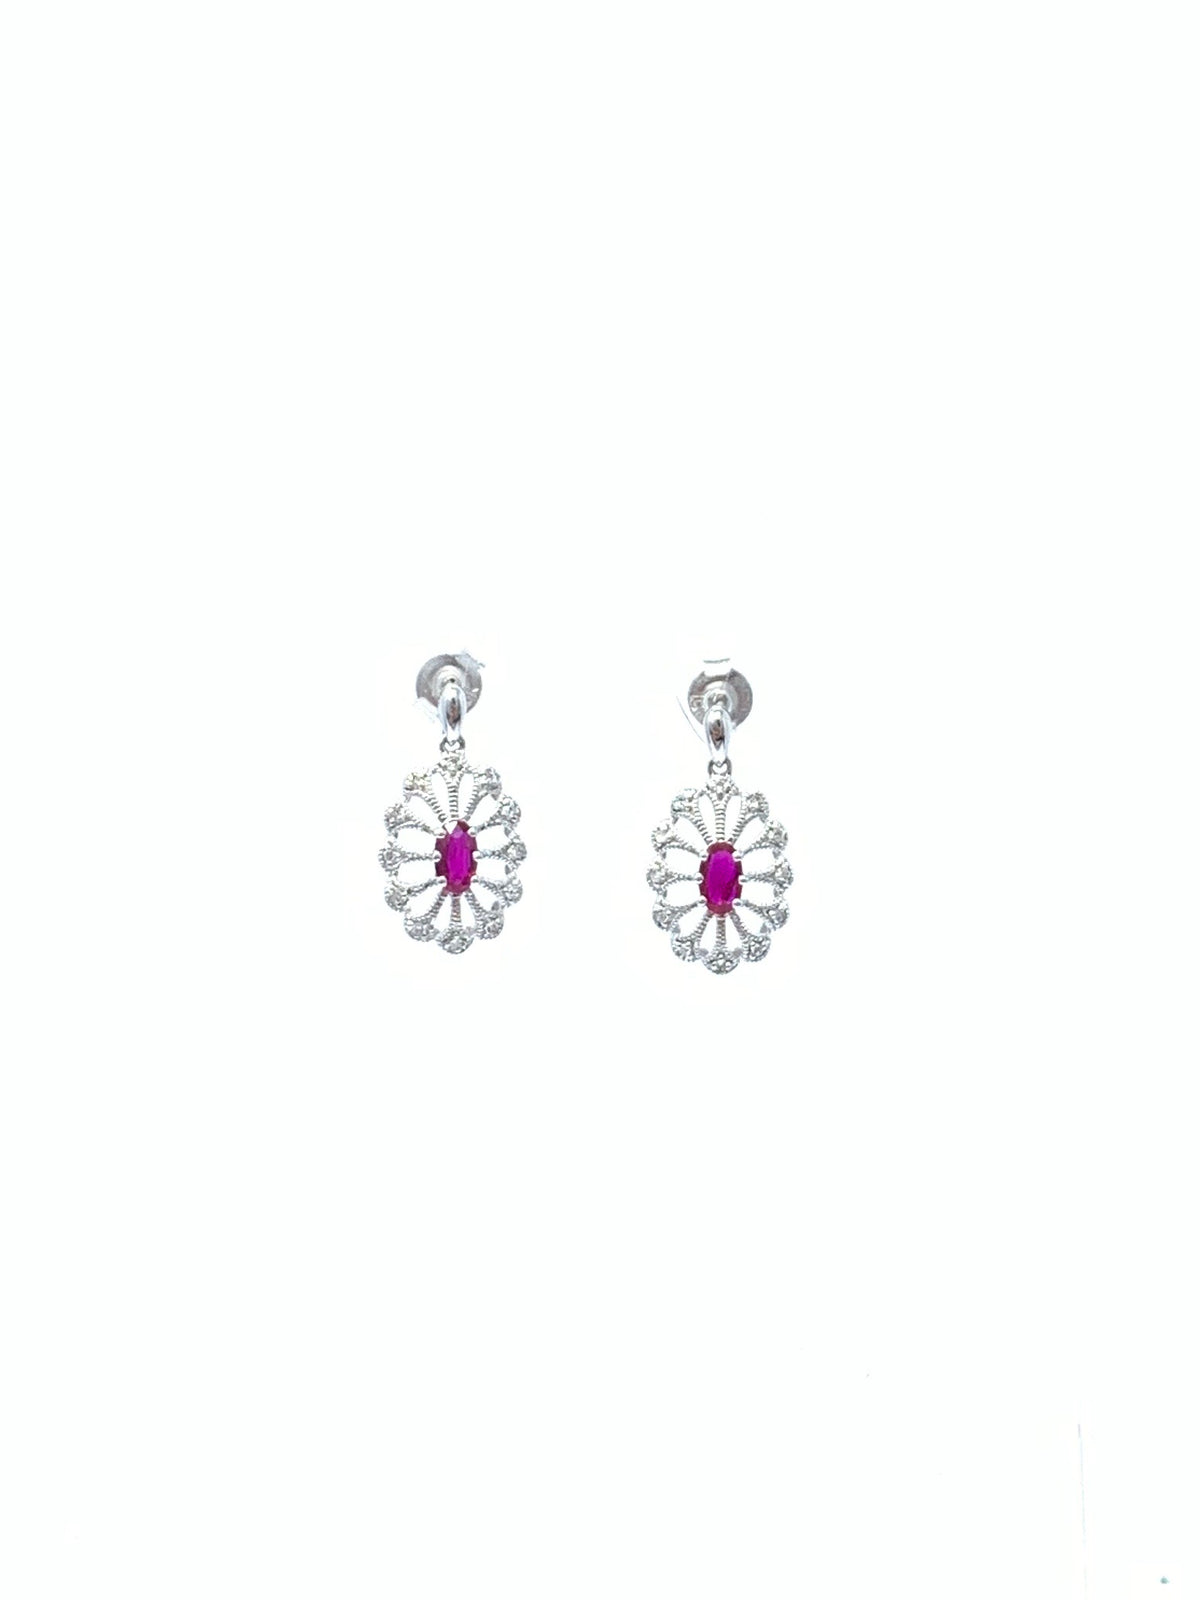 10K White Gold 0.65cttw Genuine Ruby and 0.10cttw Diamond Earrings